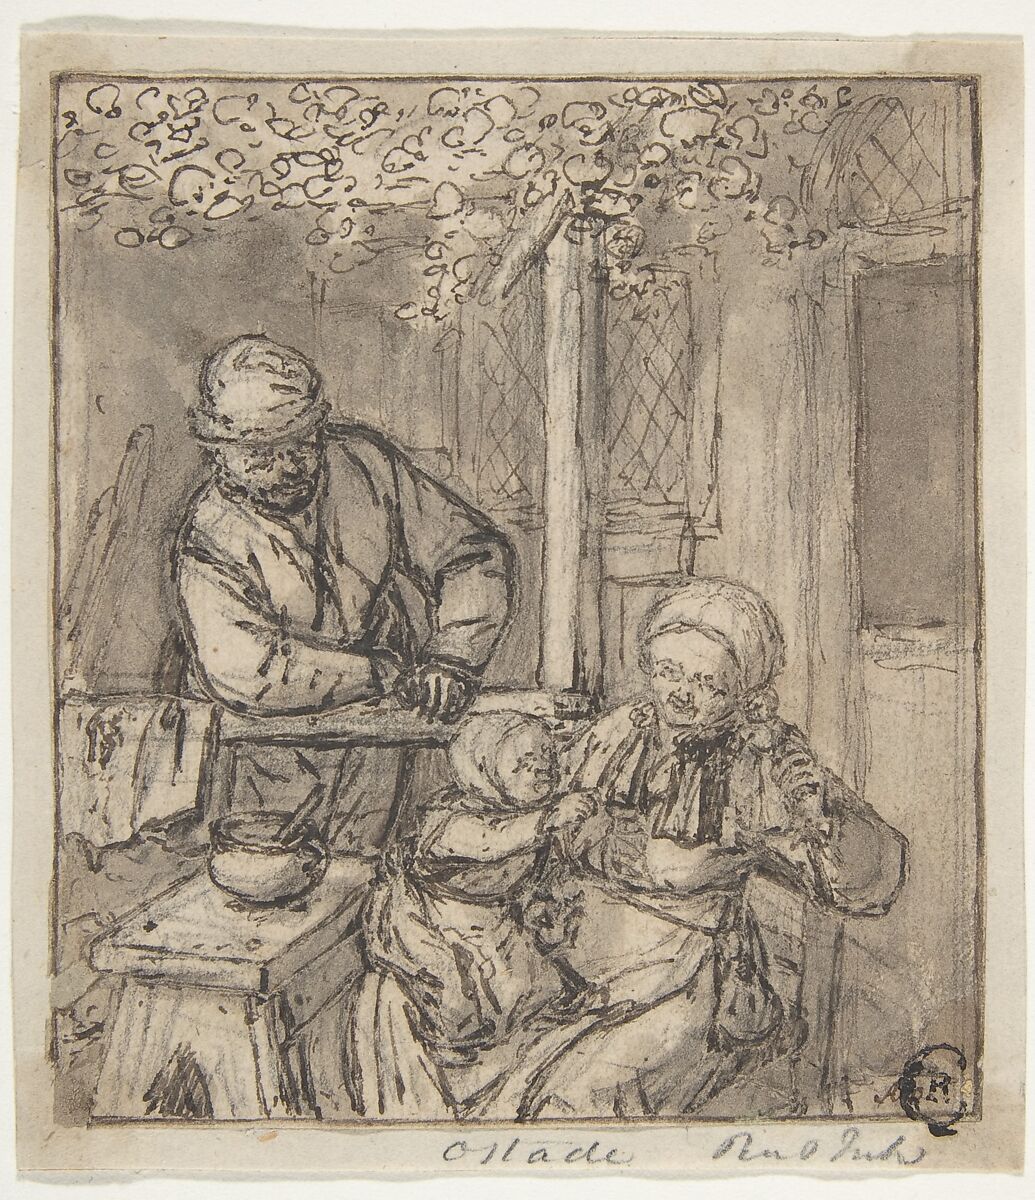 Mother and Child with a Doll., Adriaen van Ostade (Dutch, Haarlem 1610–1685 Haarlem), Pen and brown and black ink, brush and gray-brown wash, over graphite. Incised. Tacked down to paper mount. 